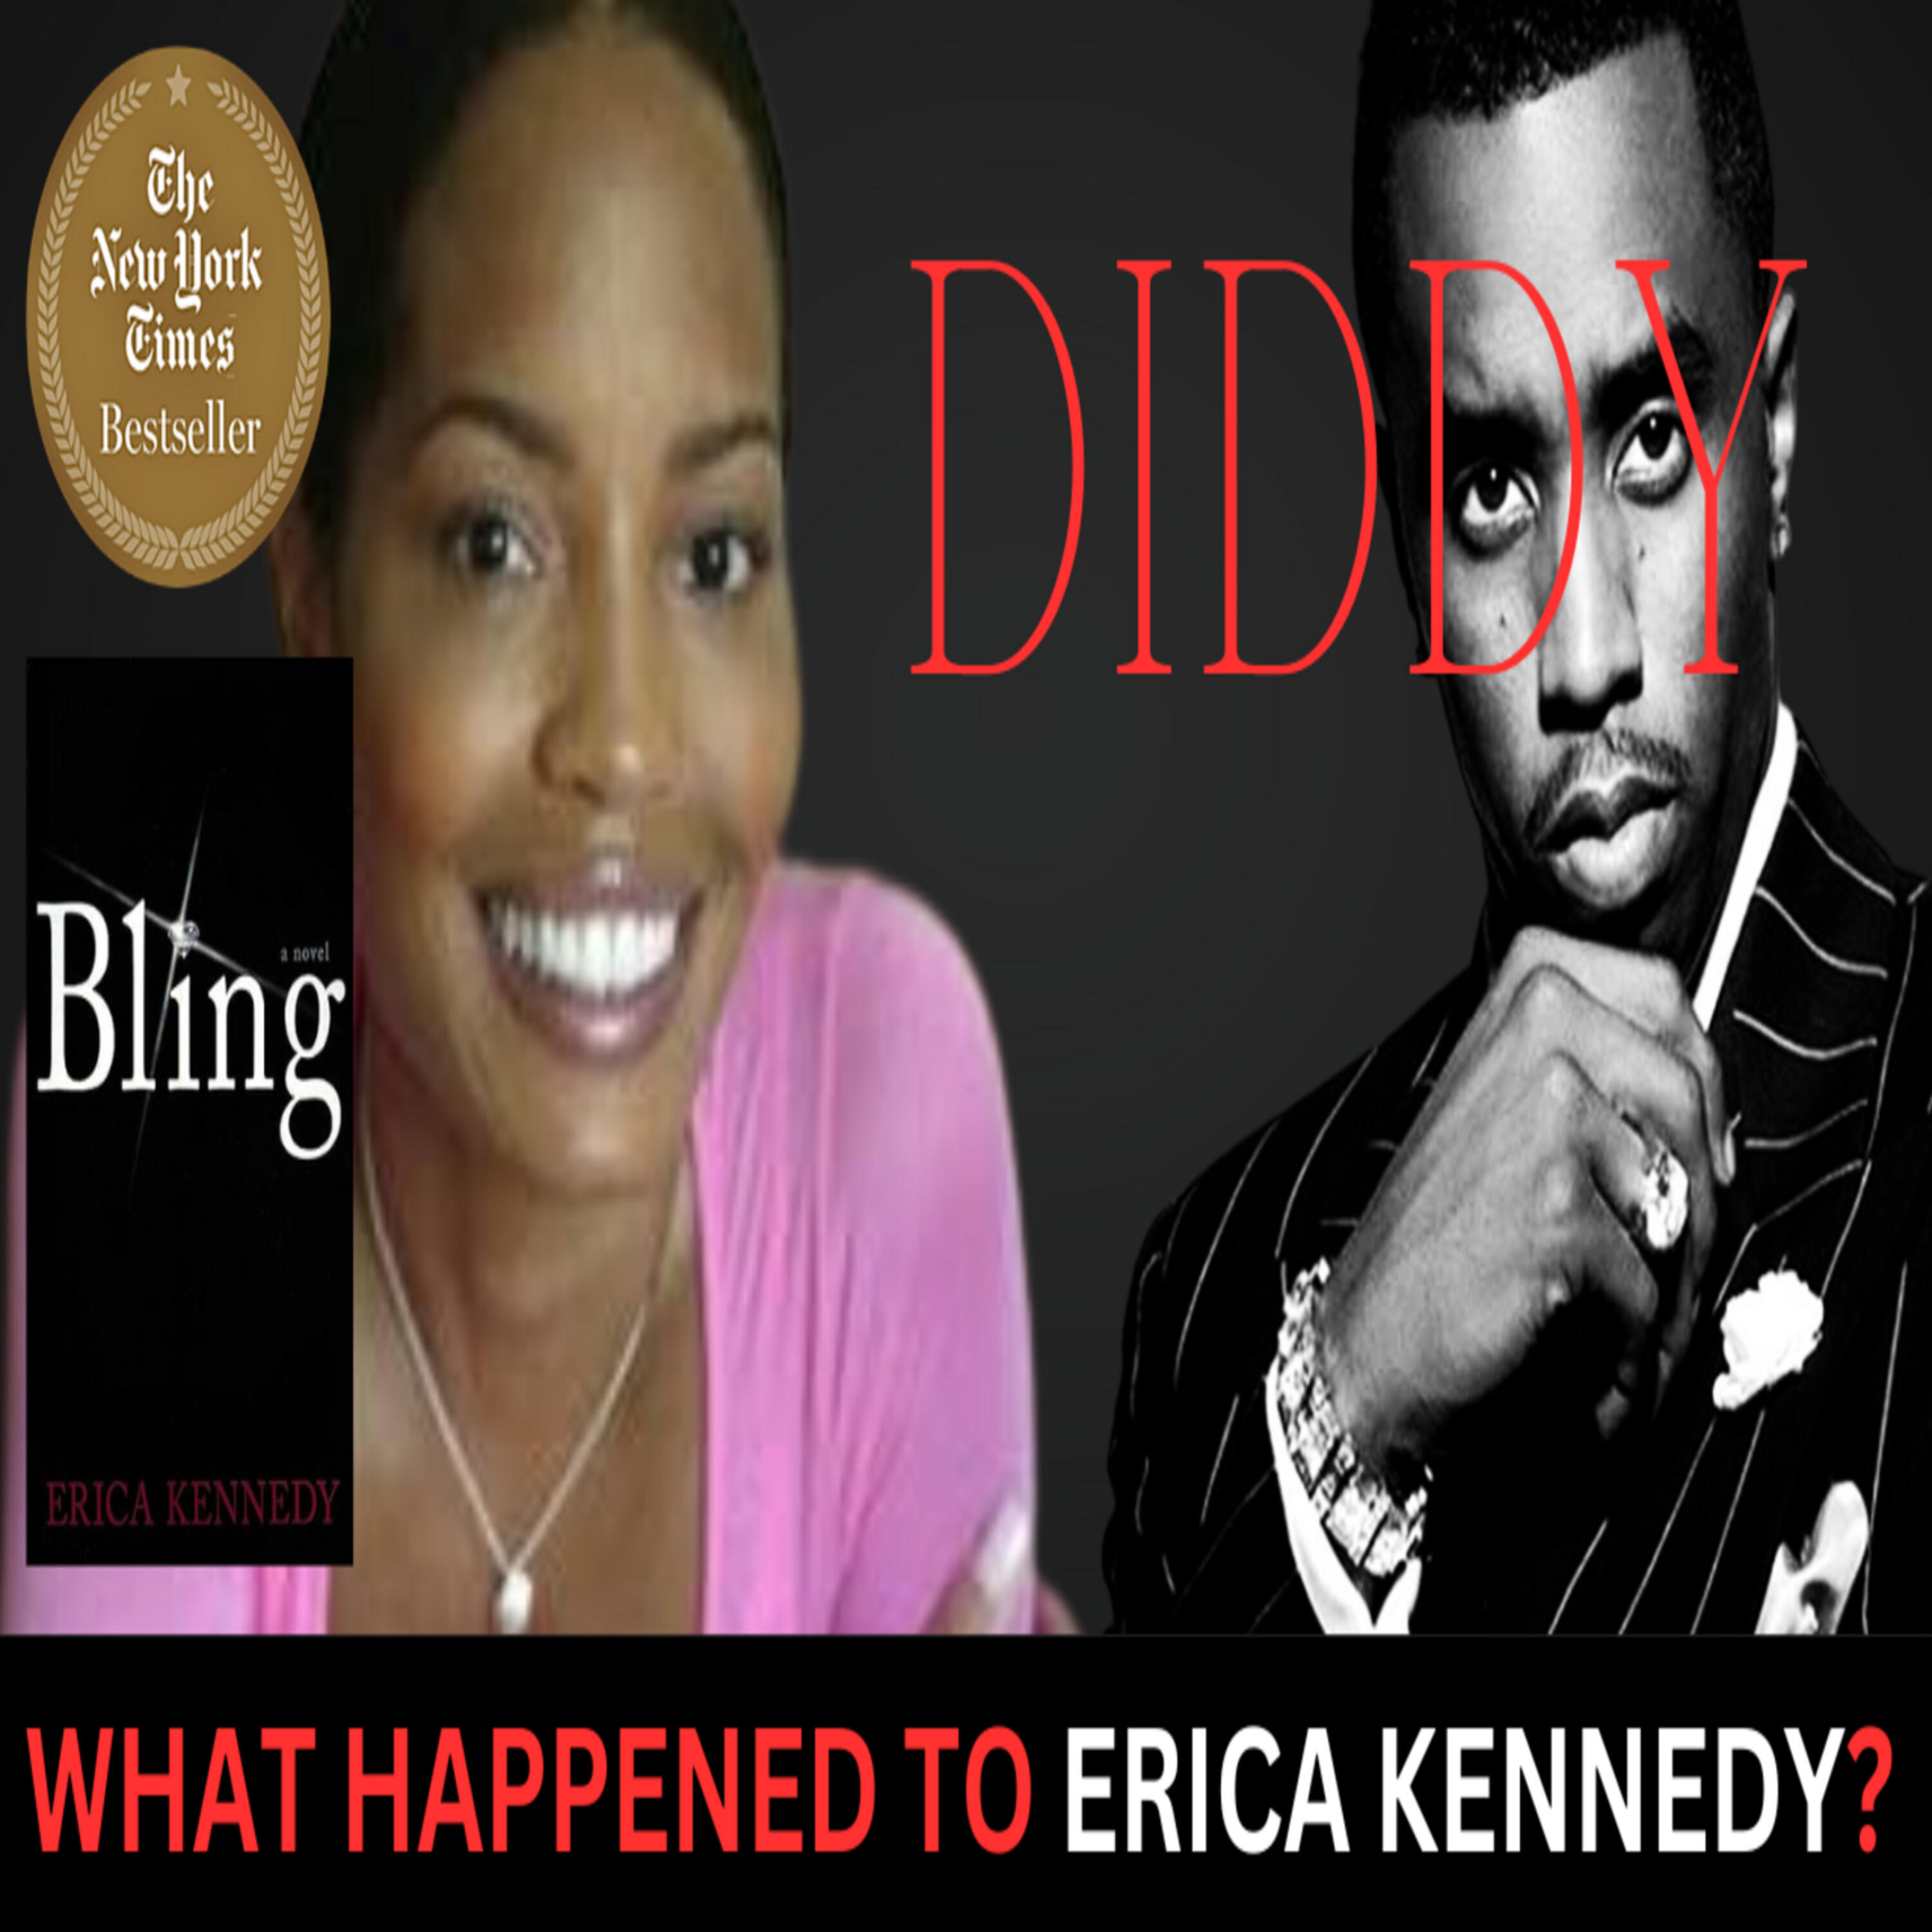 Bling by Erica Kennedy